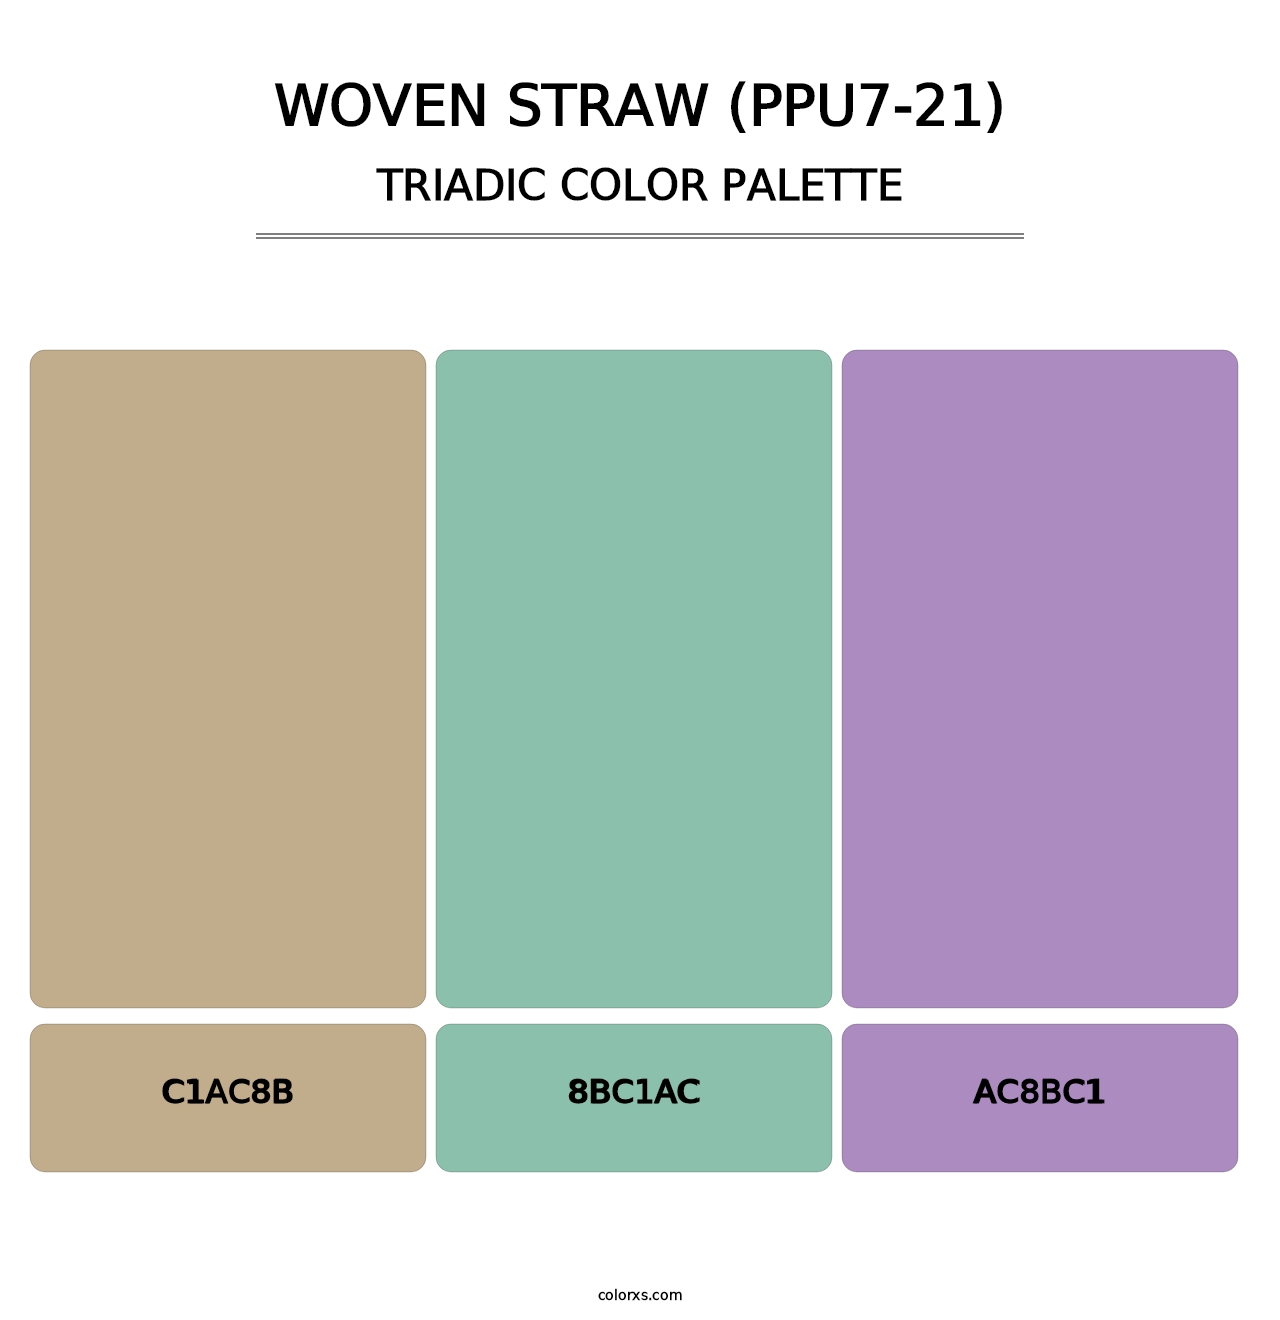 Woven Straw (PPU7-21) - Triadic Color Palette